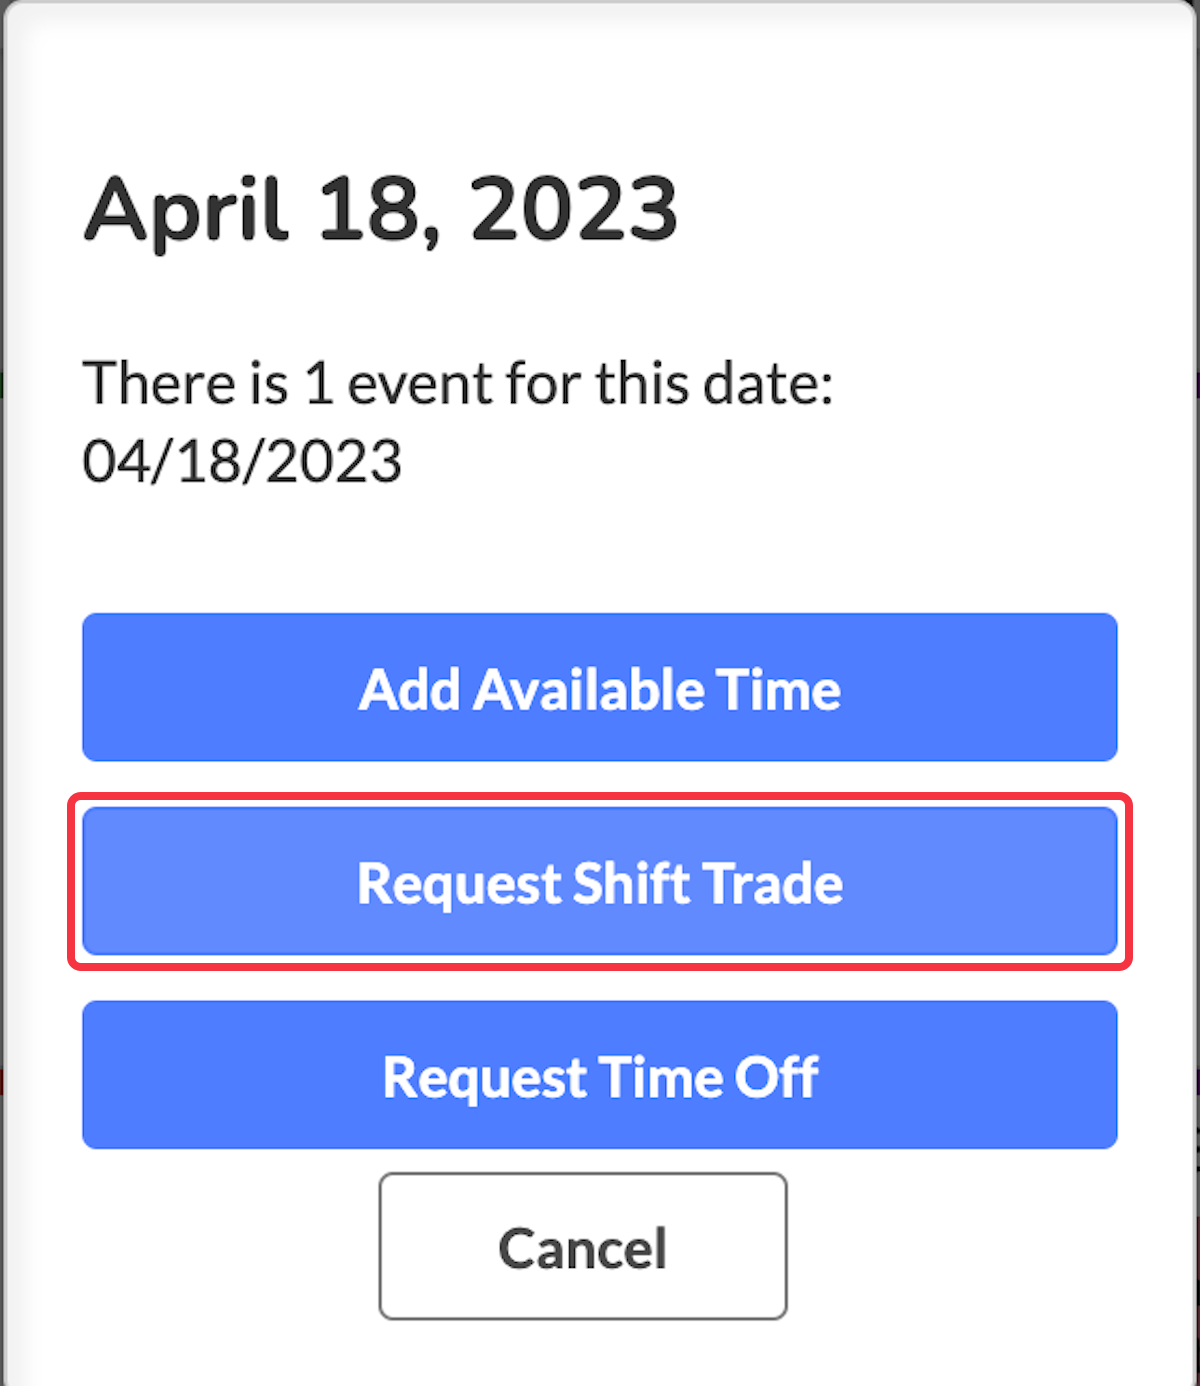 Click on Request Shift Trade.